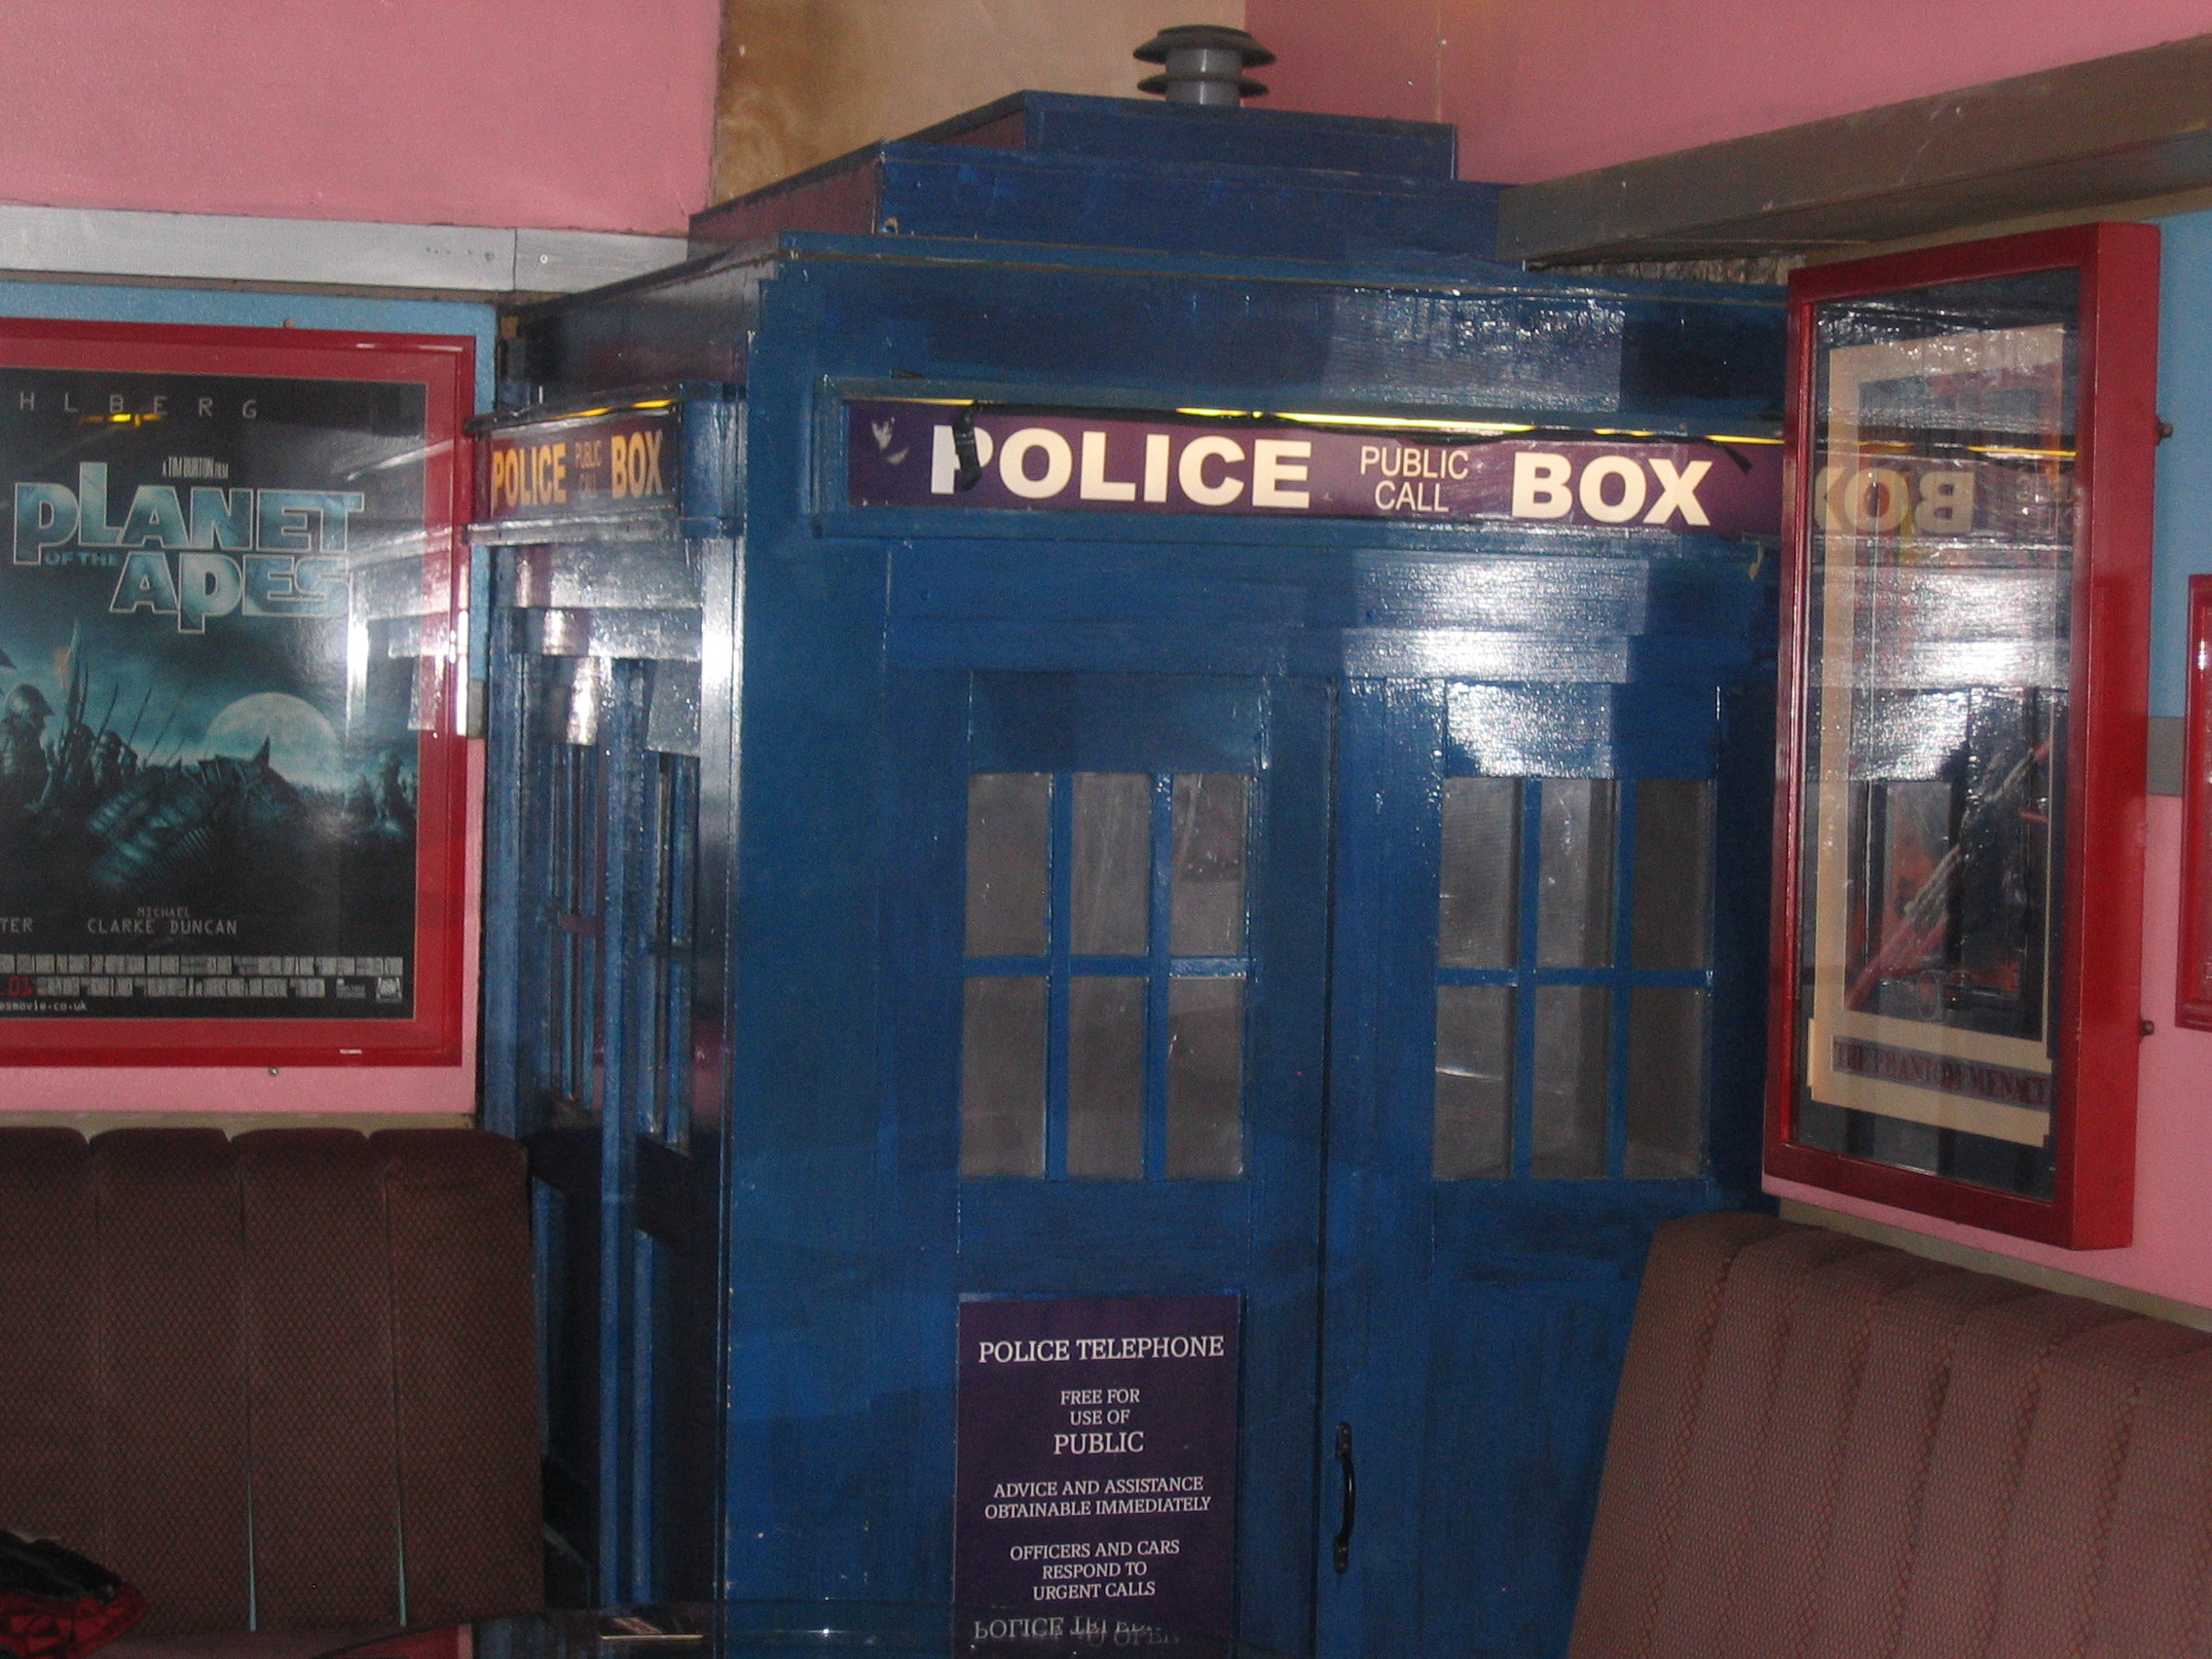 Photo taken by me – The Dr Who TARDIS in FAB Café Manchester  